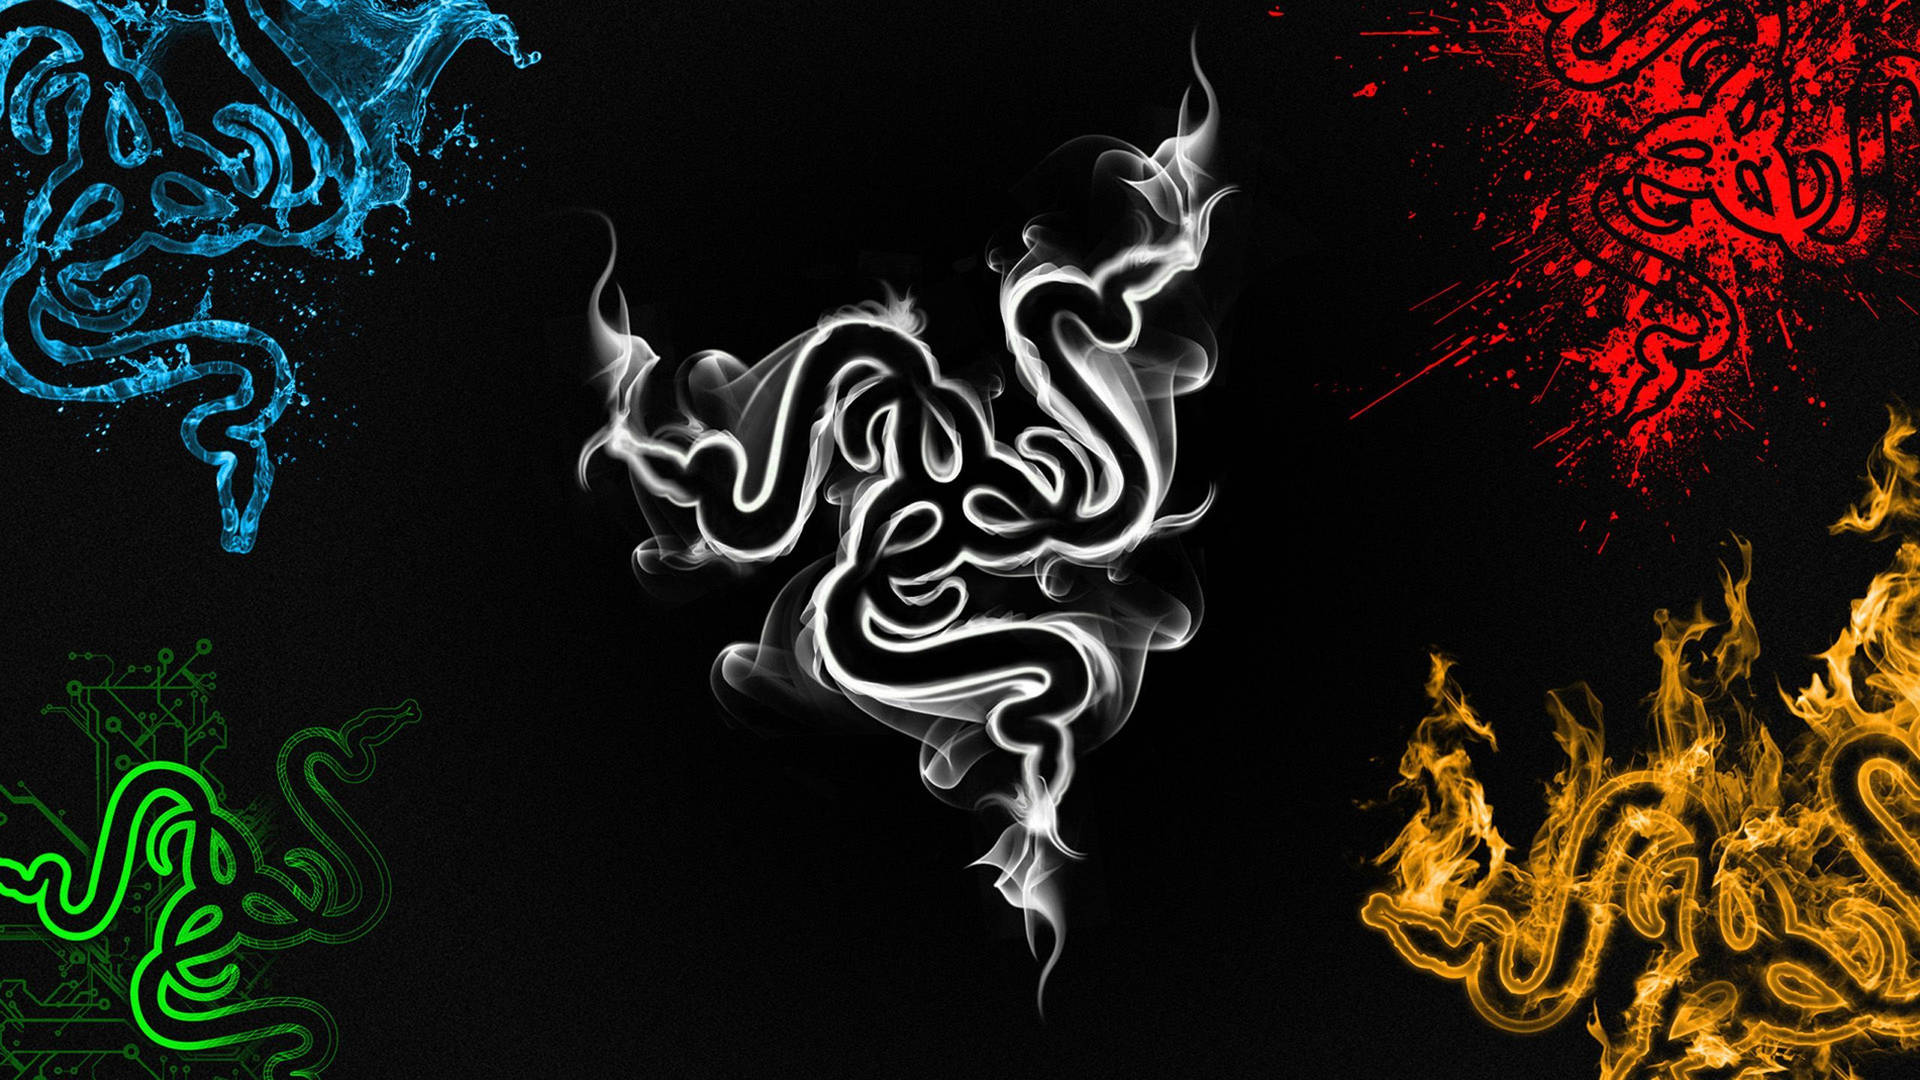 Light Up The Night With Cool Gaming Razer Logo Wallpaper